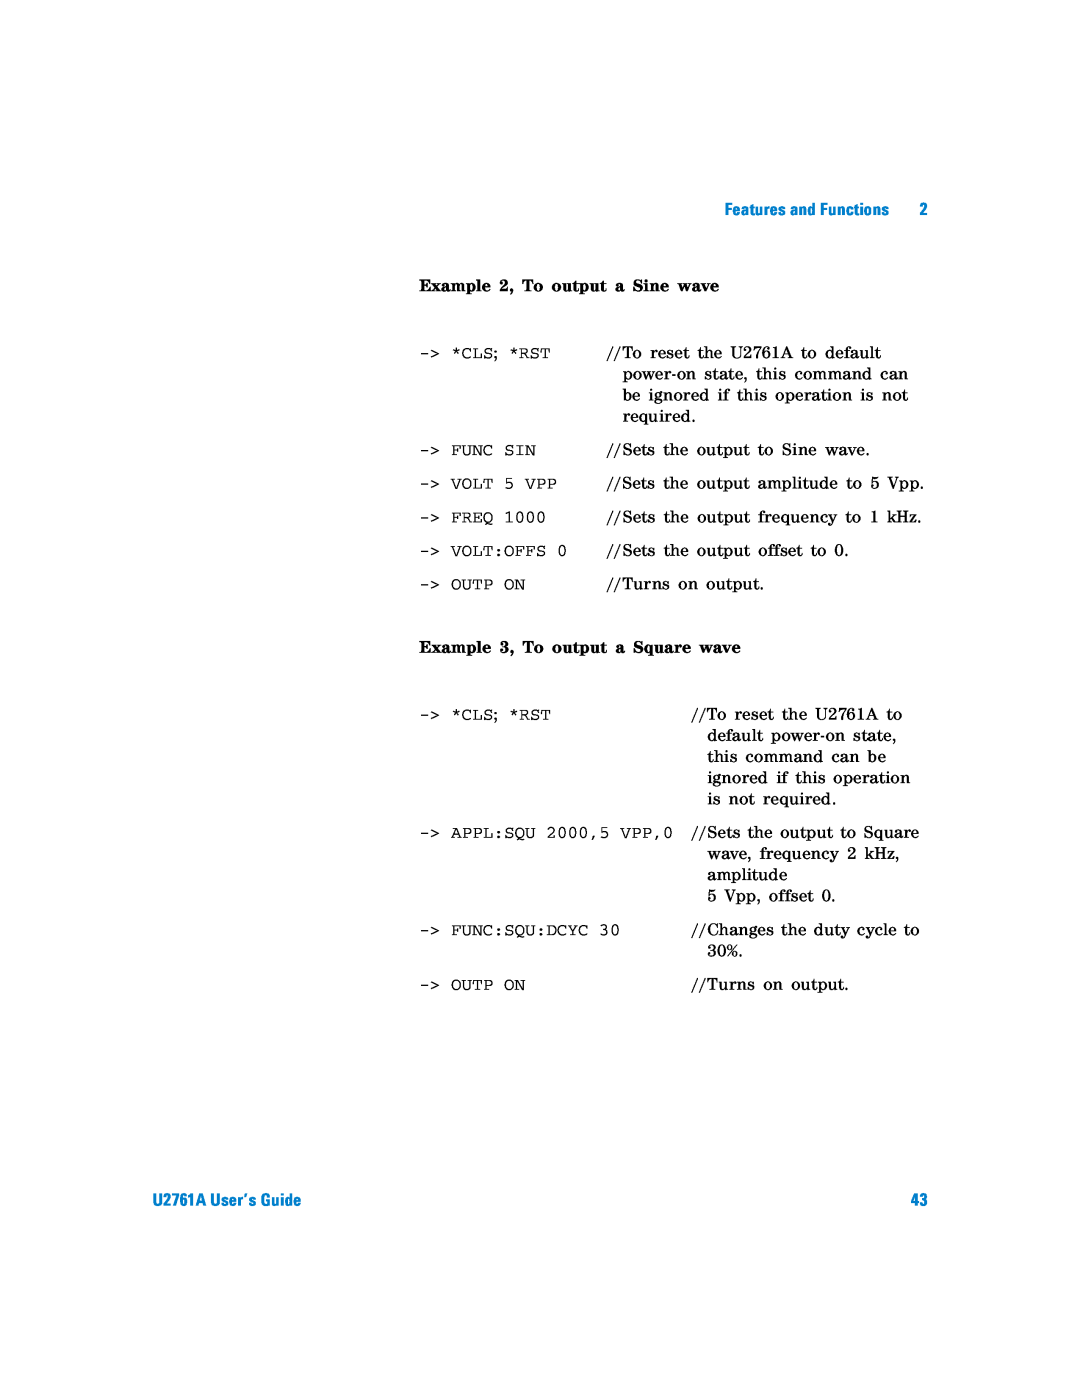 Agilent Technologies manual Example 2, To output a Sine wave, Example 3, To output a Square wave, U2761A User’s Guide 